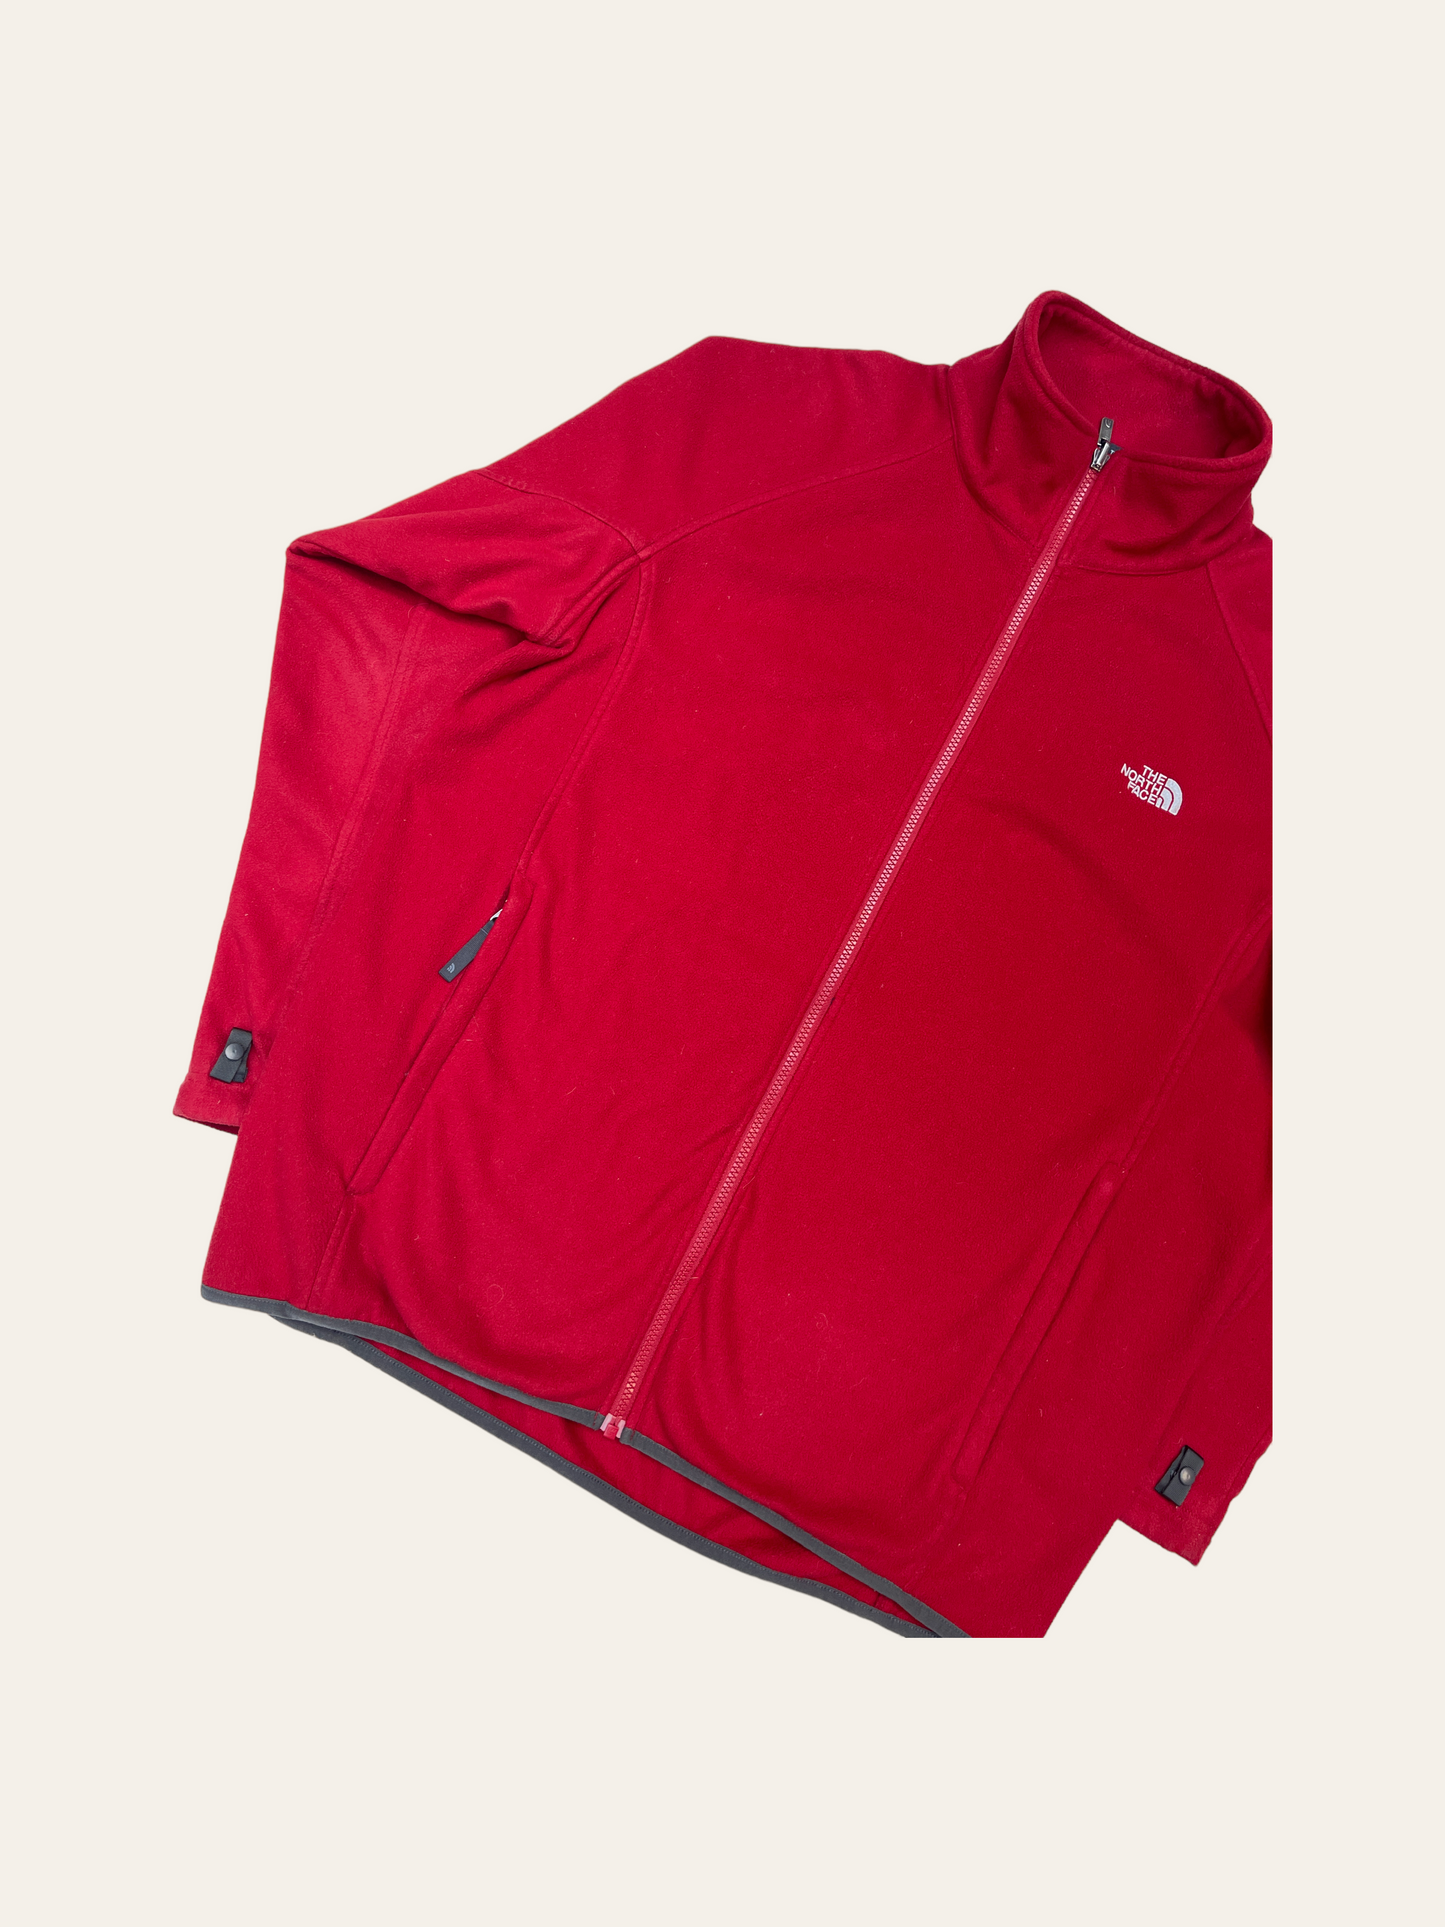 POLAR FULL ZIP THE NORTH FACE RED (L)